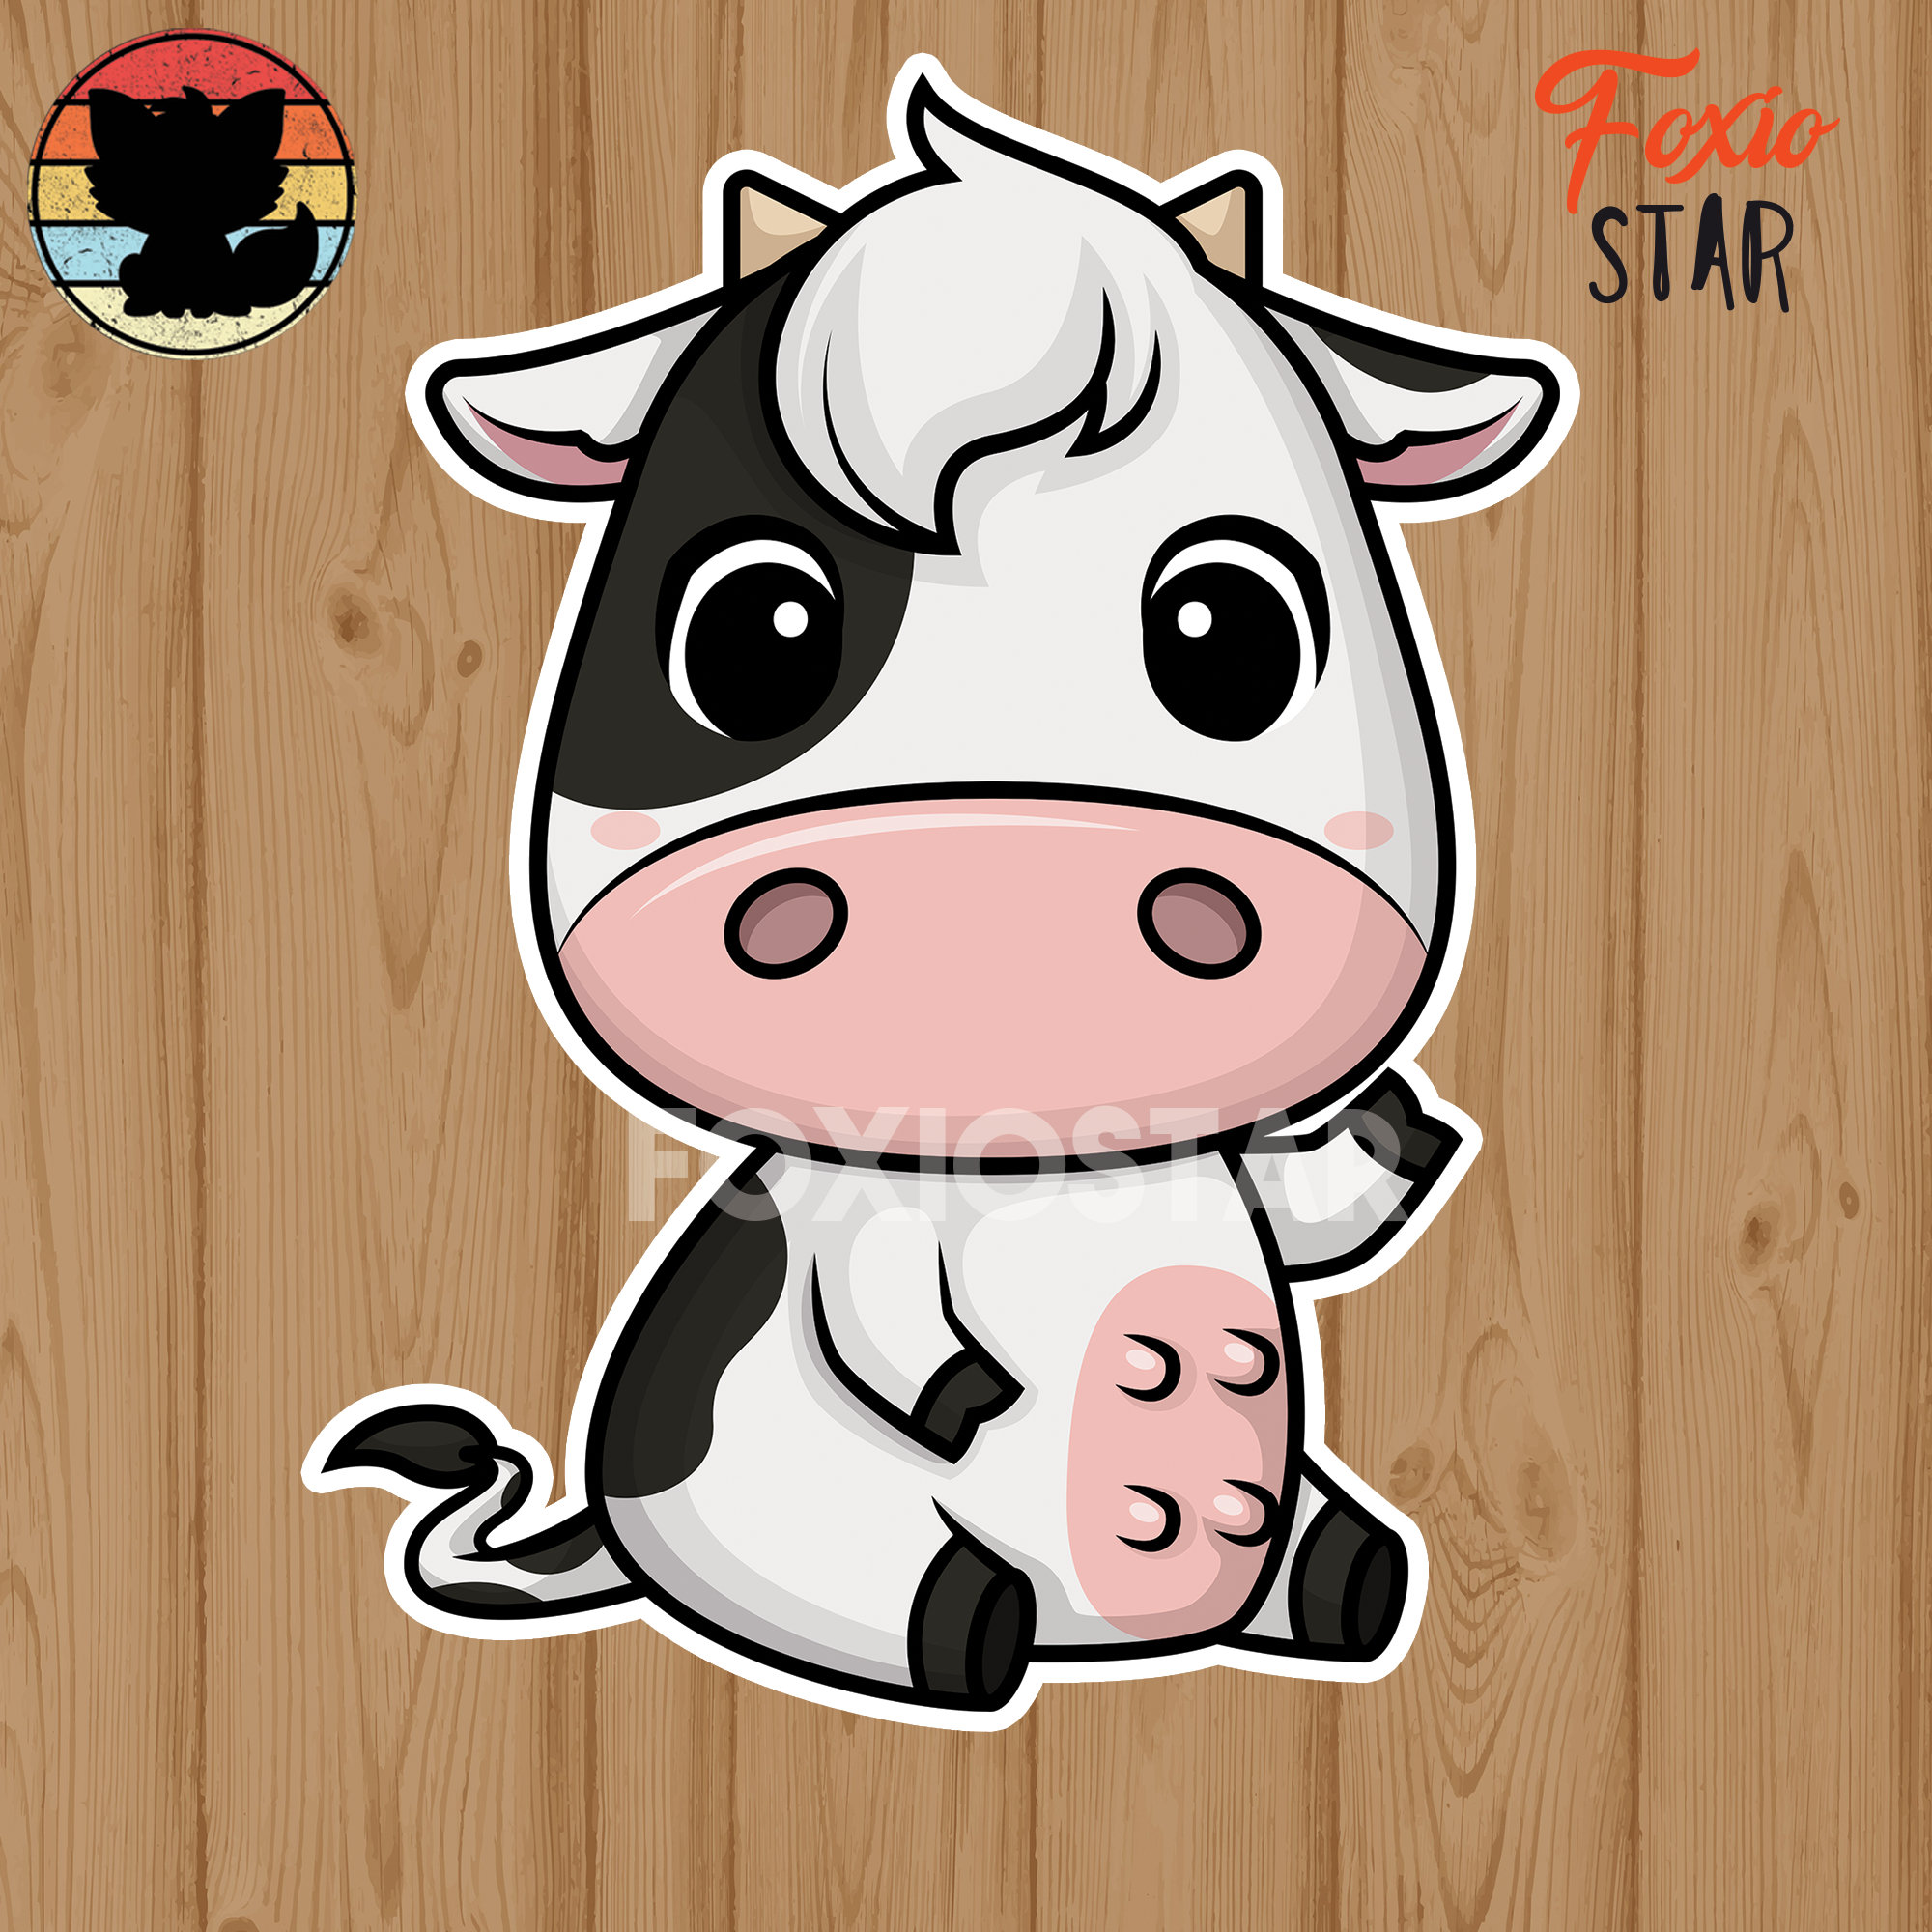 Cute Cow Peeking Stickers for Cars, Laptops, Hydroflasks, Gifts – Nekodecal